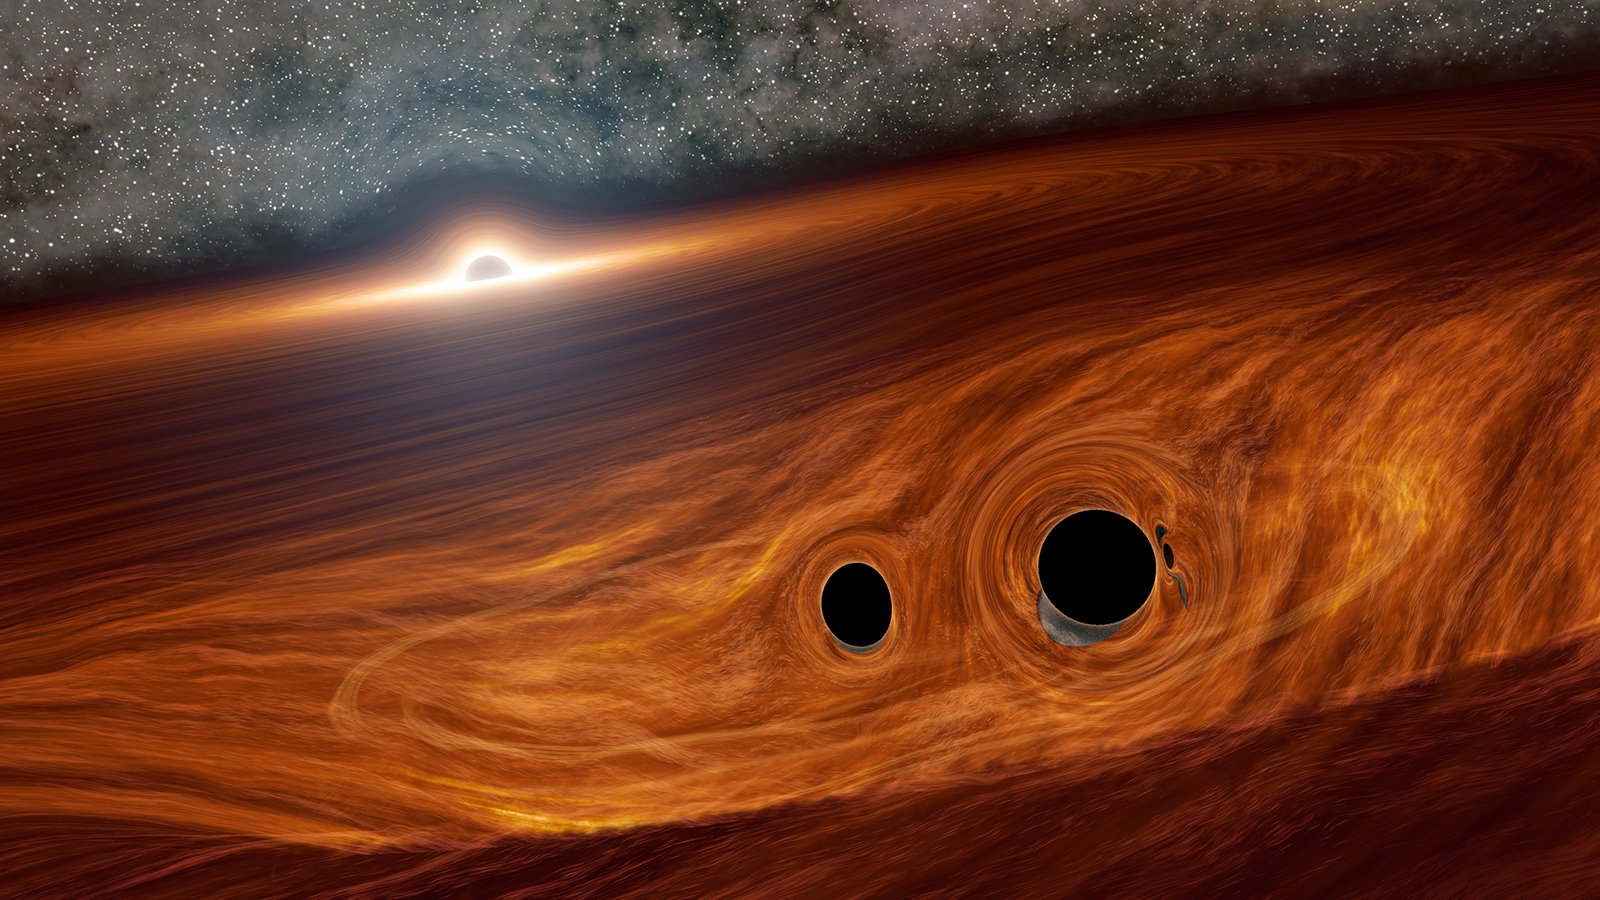 Artist's concept of a supermassive black hole and its surrounding disk of gas. Embedded within this disk are two smaller black holes orbiting one another.